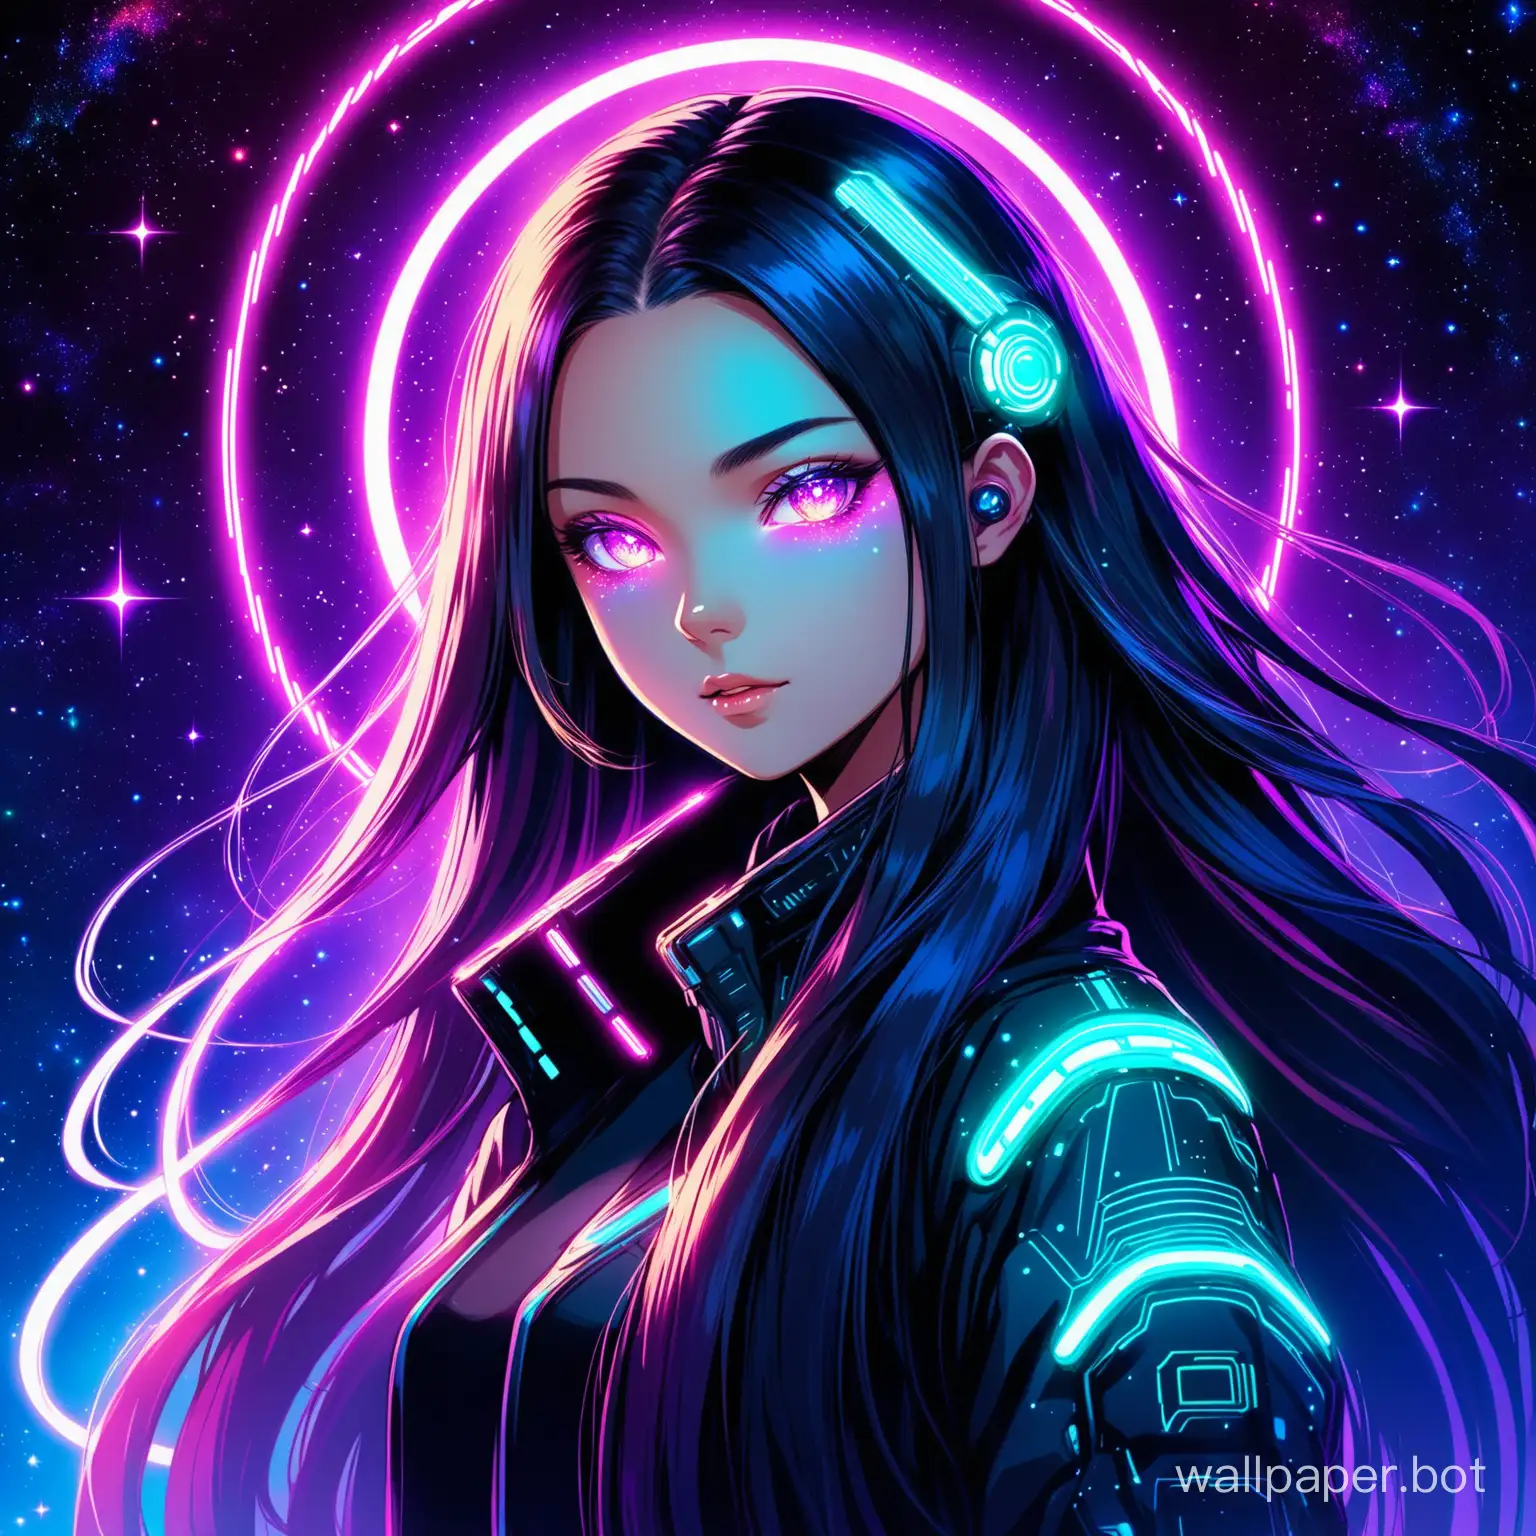 A girl with long hair, neon lights, and a glowing aura. She has a futuristic and cyberpunk appearance, with digital art and anime influences. Her hair is styled in a way that resembles the universe, with stars and galaxies intertwined. Create a portrait of this girl, emphasizing her otherworldly and magical qualities.